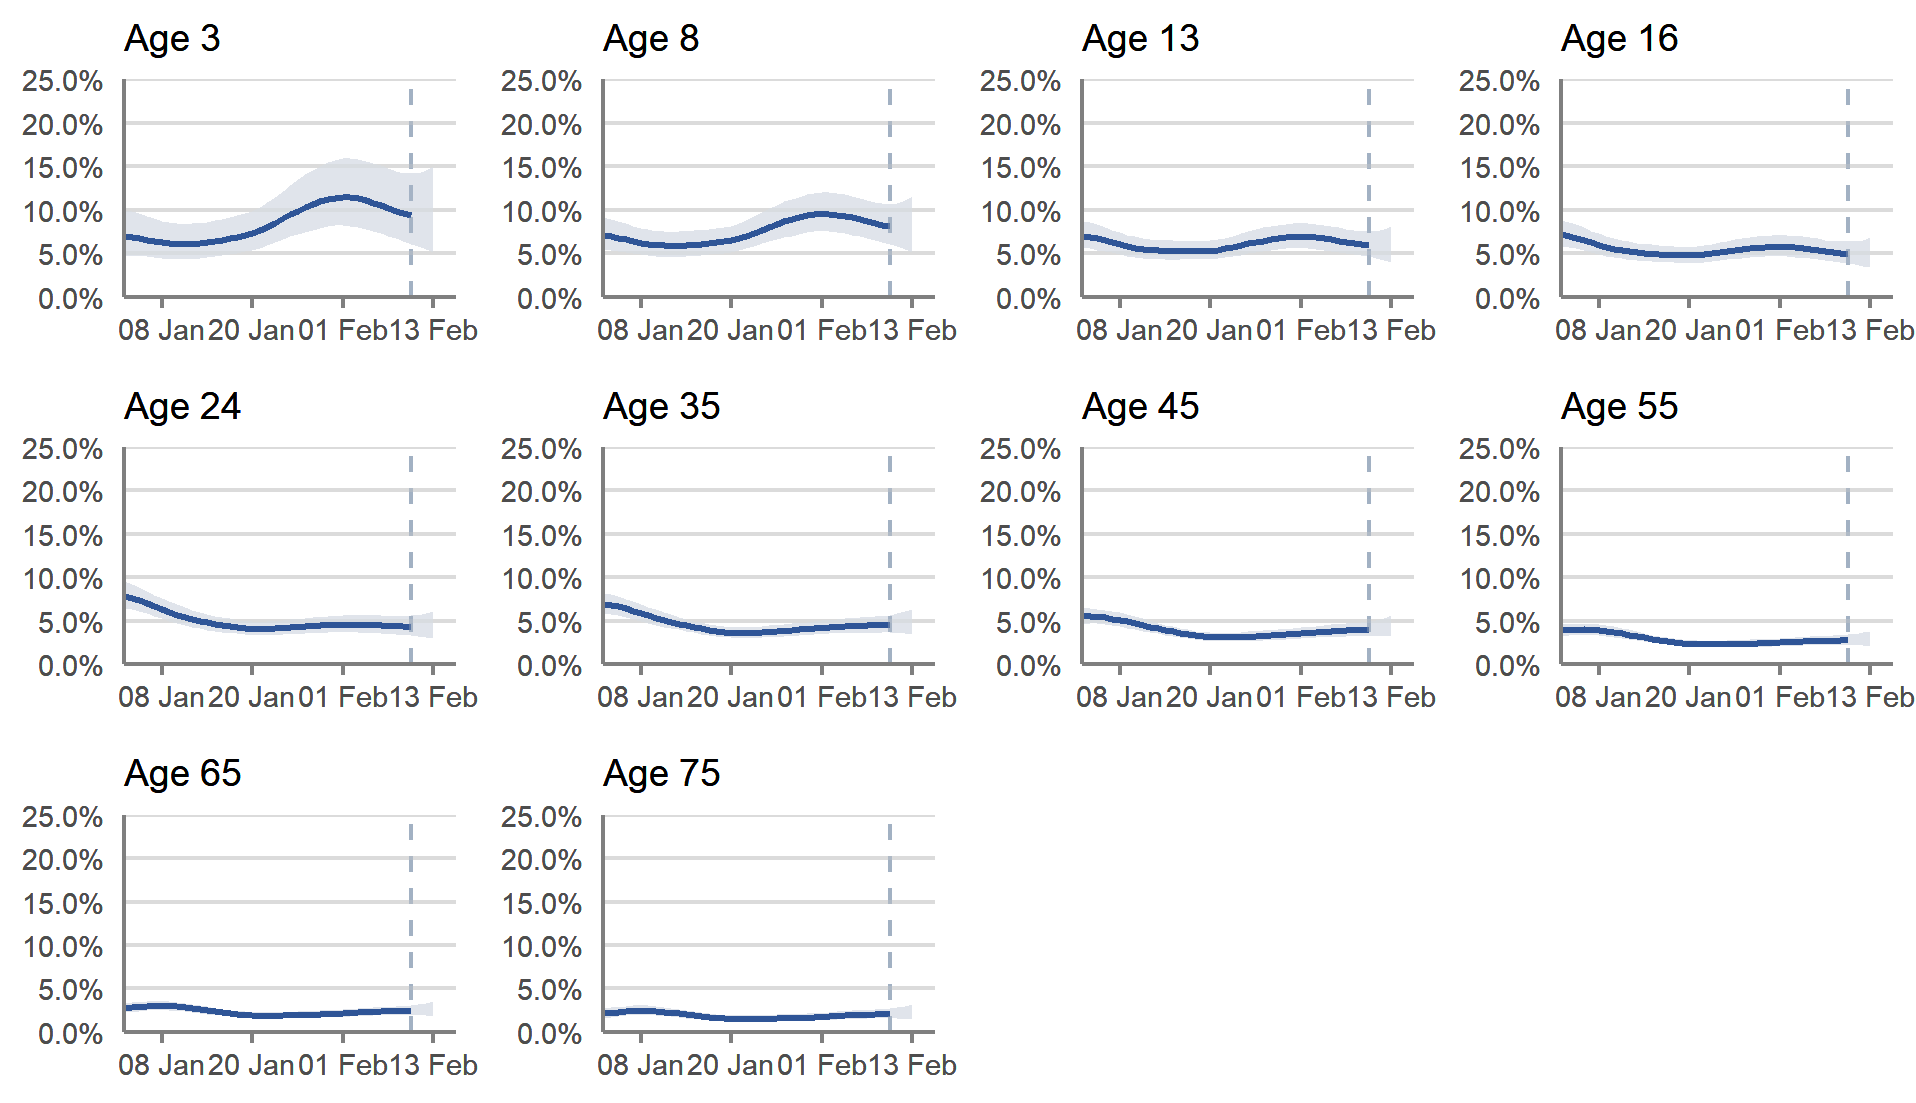 In Scotland, the trends in estimates for the percentage of people testing positive for COVID-19 in private residential households were uncertain in the most recent week across all age groups due to wide confidence intervals.